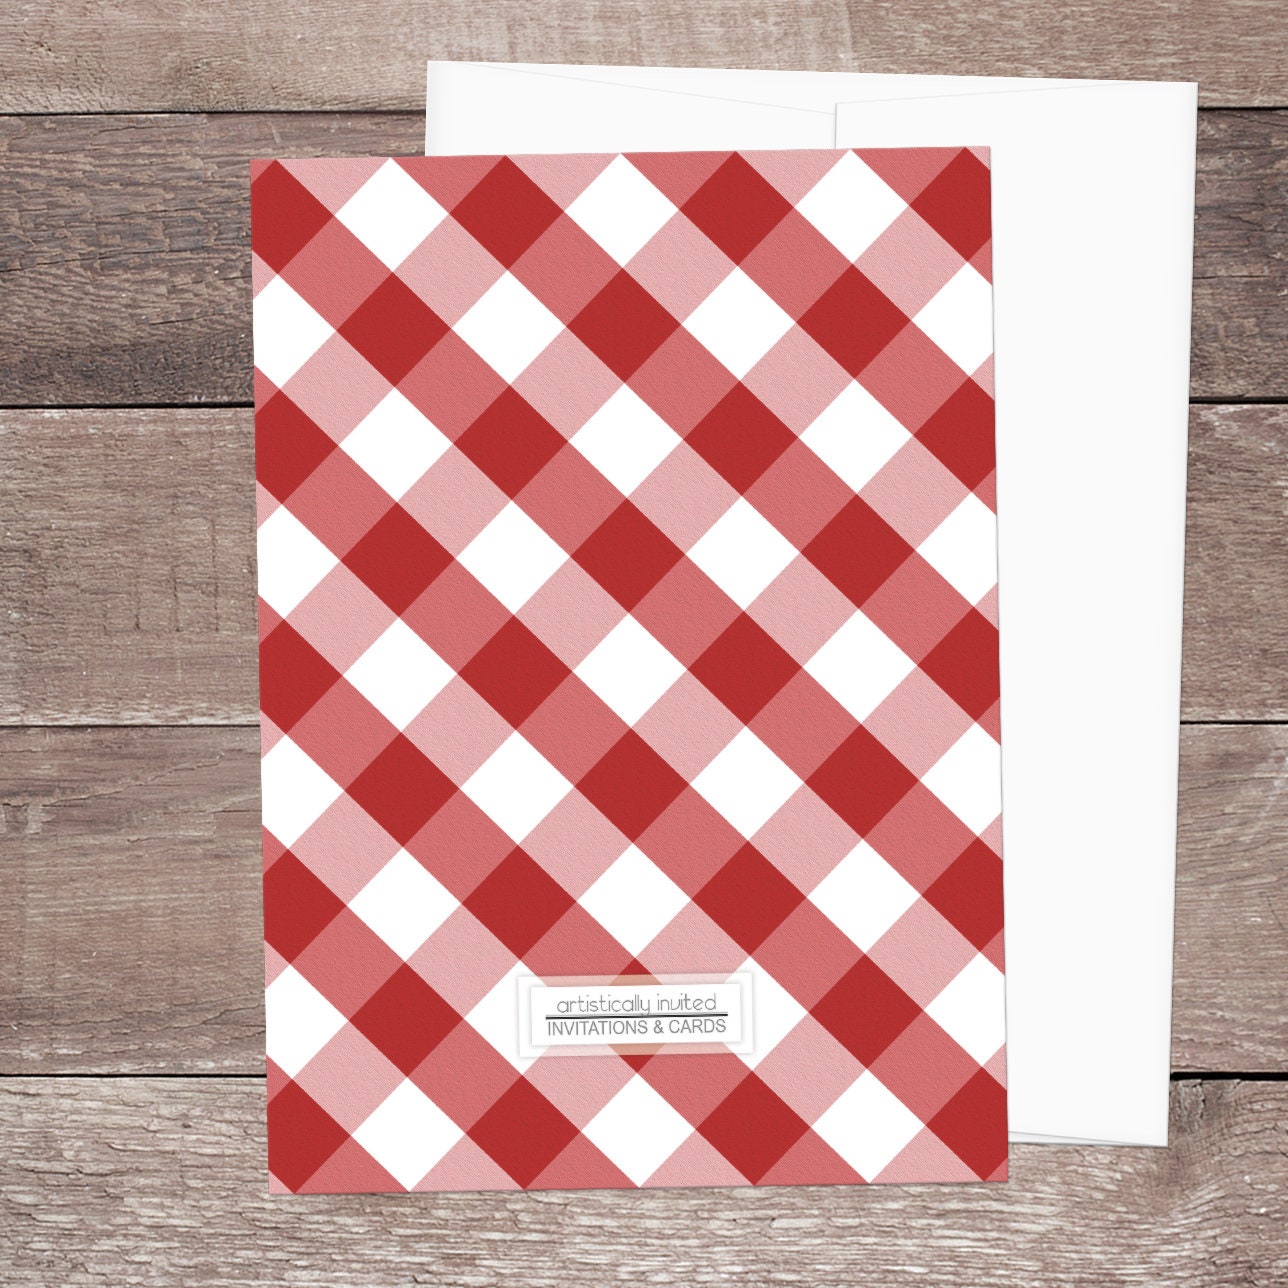 Red Gingham Birthday Party Invitations, Red White Gingham Check Pattern,  Any Age or Milestone Printed -  Canada